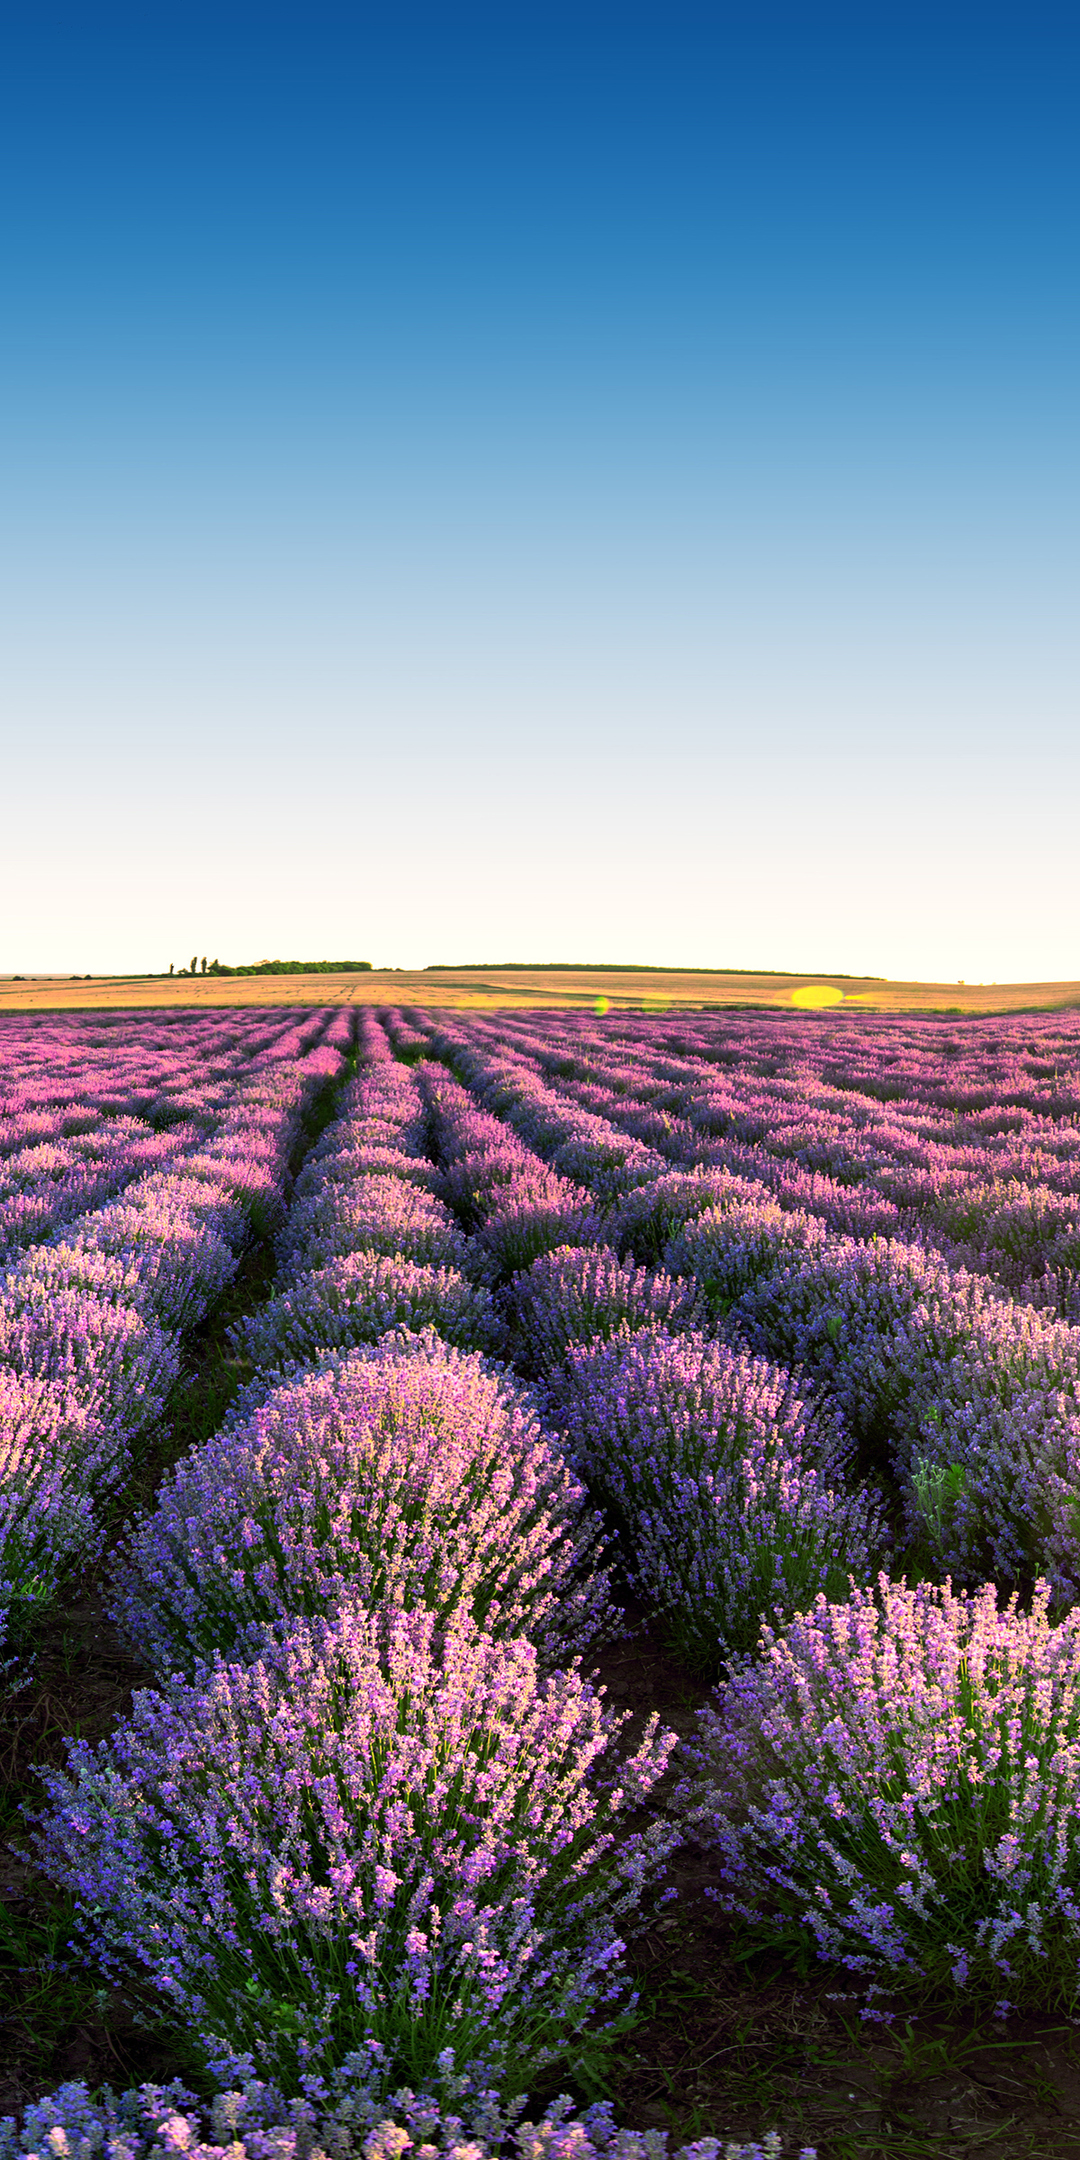 Lavender Field Photos Download The BEST Free Lavender Field Stock Photos   HD Images